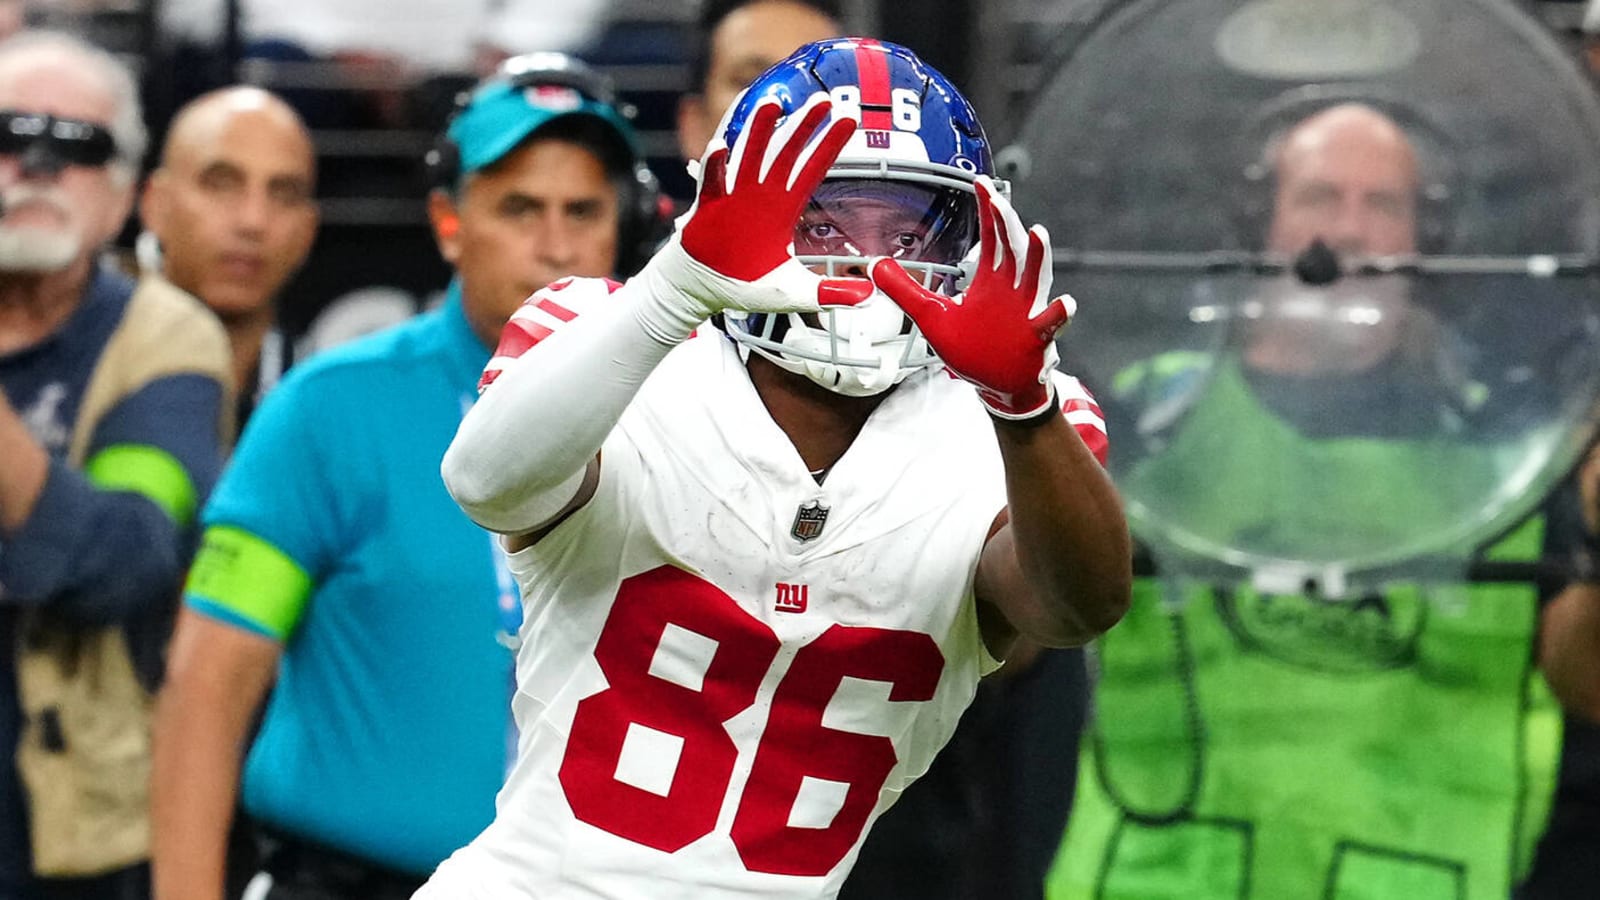 Top Giants WR skips workouts over his contract